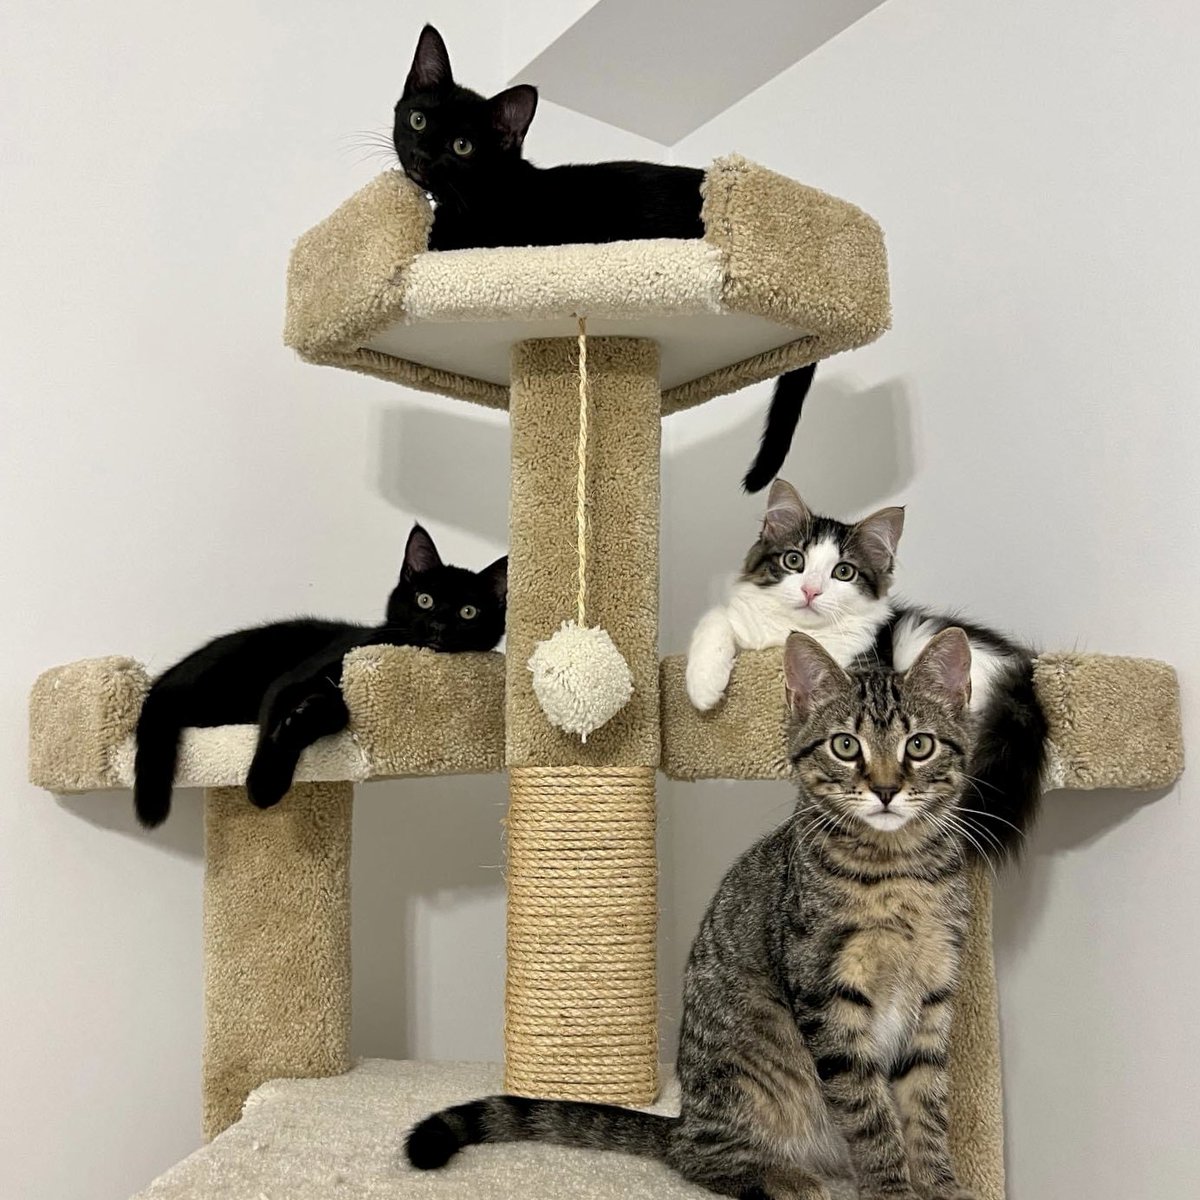 Family photo time! The gears donned their best fur jackets for this one. 

#familyphoto #CatsAreFamily #AdoptDontShop